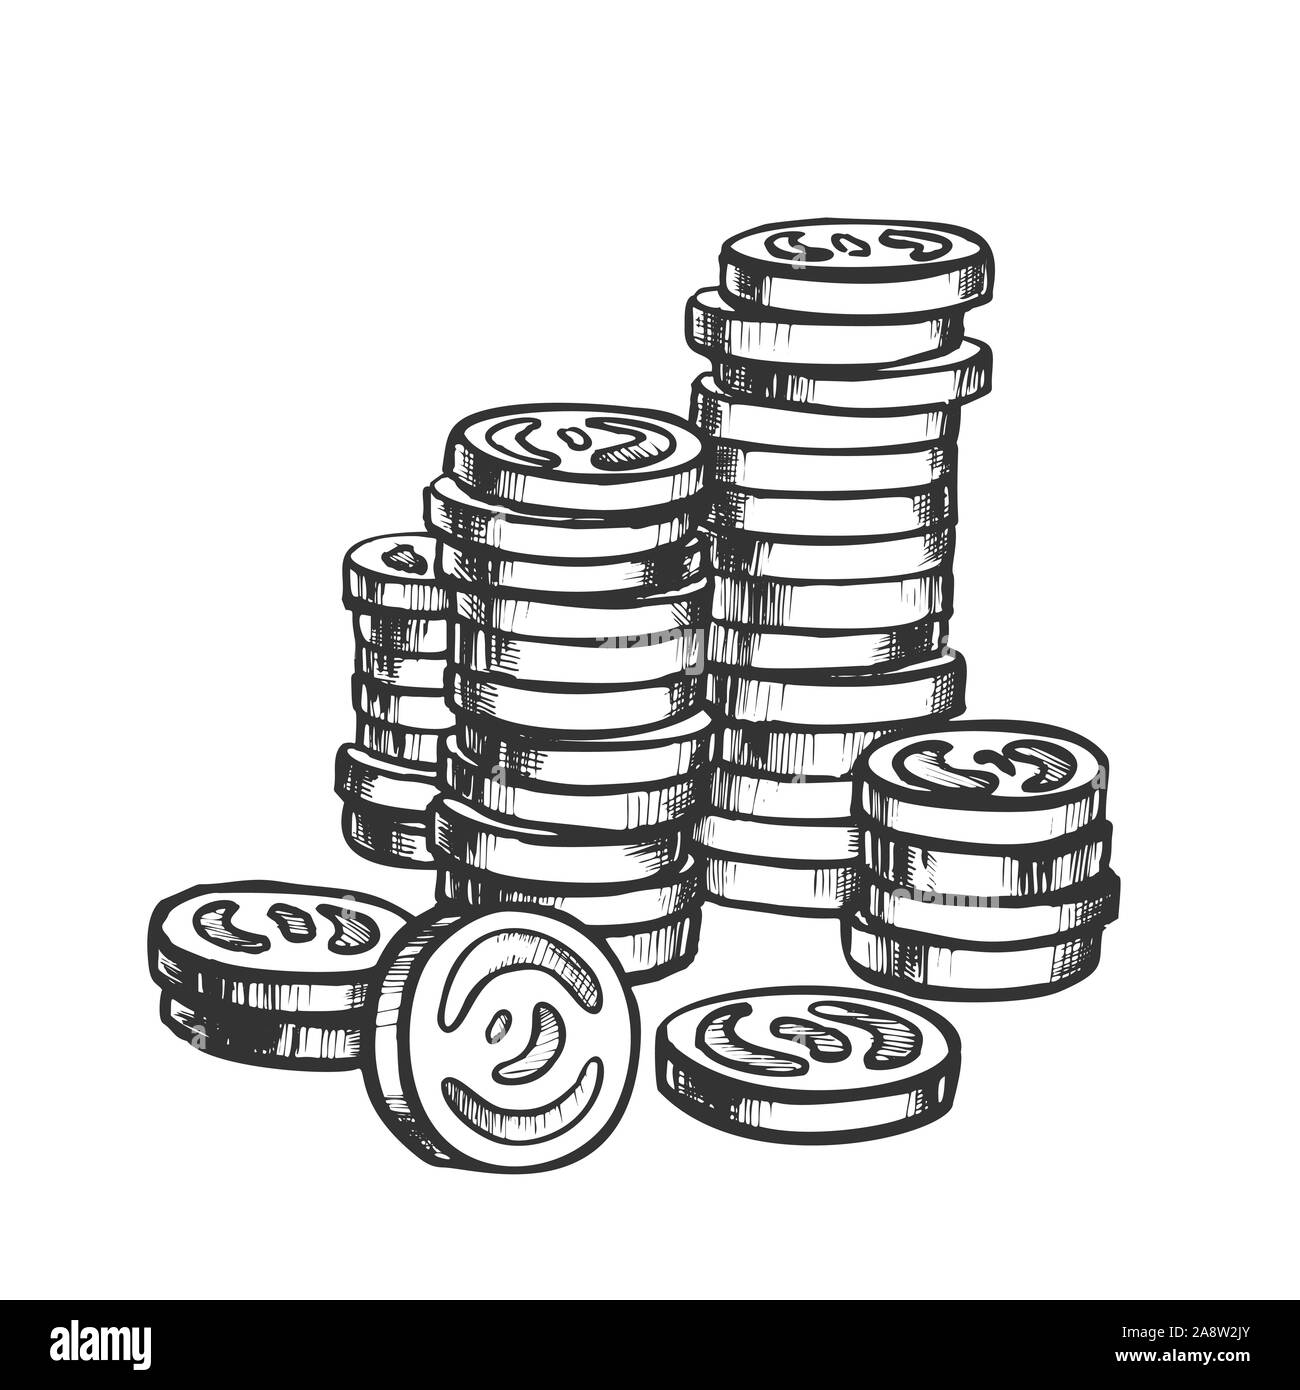 Coins Pile Stacked, Metal Money Monochrome Vector Stock Vector Image ...